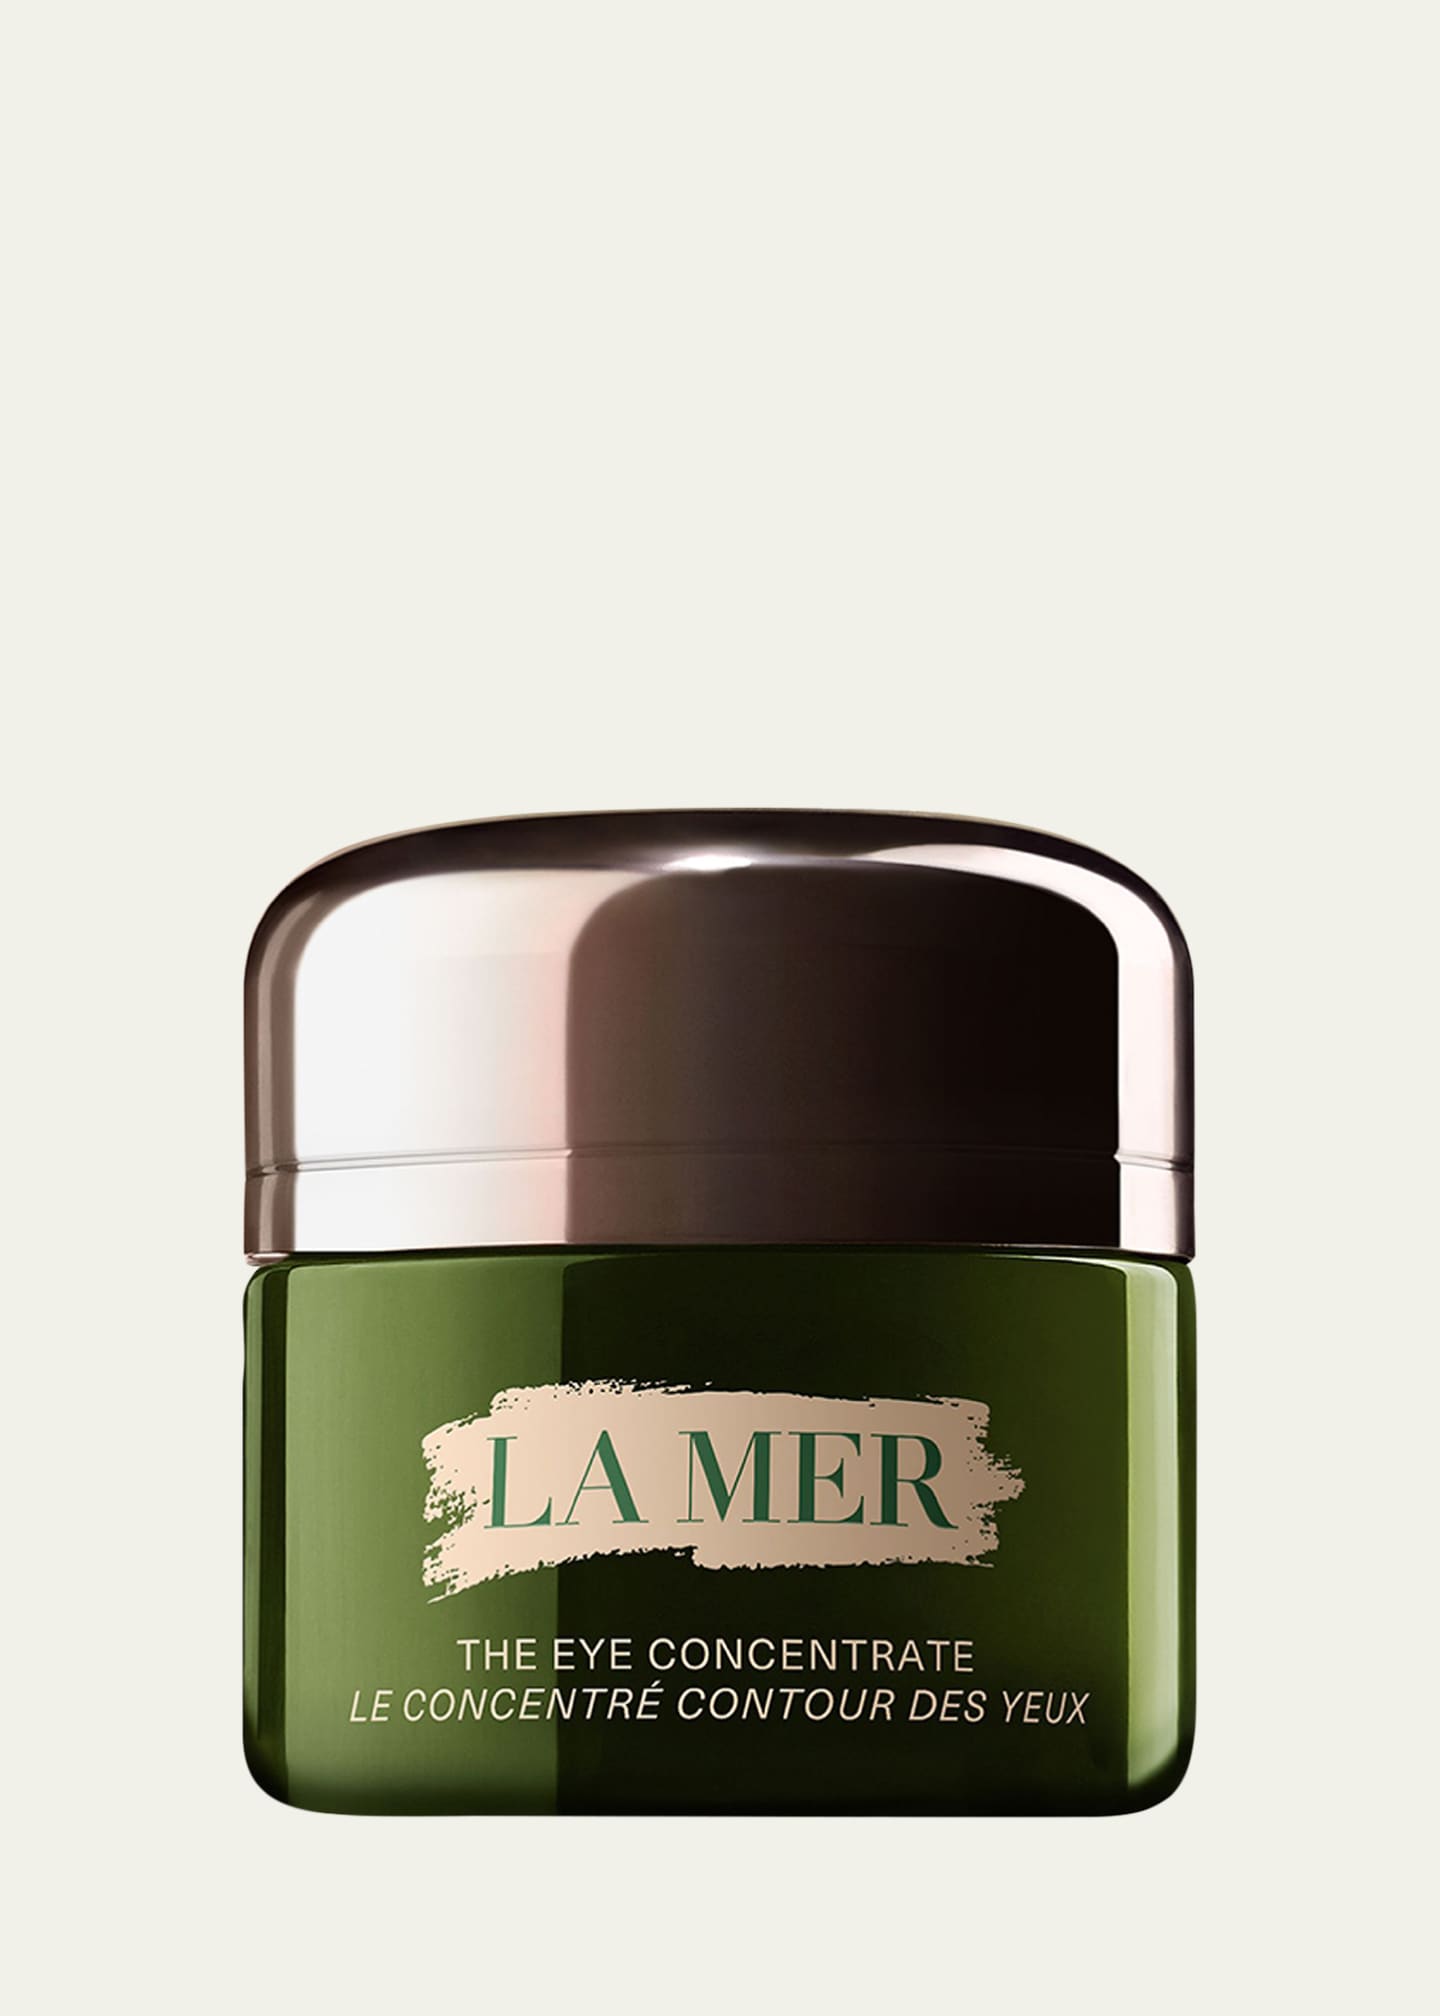 La Mer The Eye Concentrate, 0.5 oz. Image 1 of 5